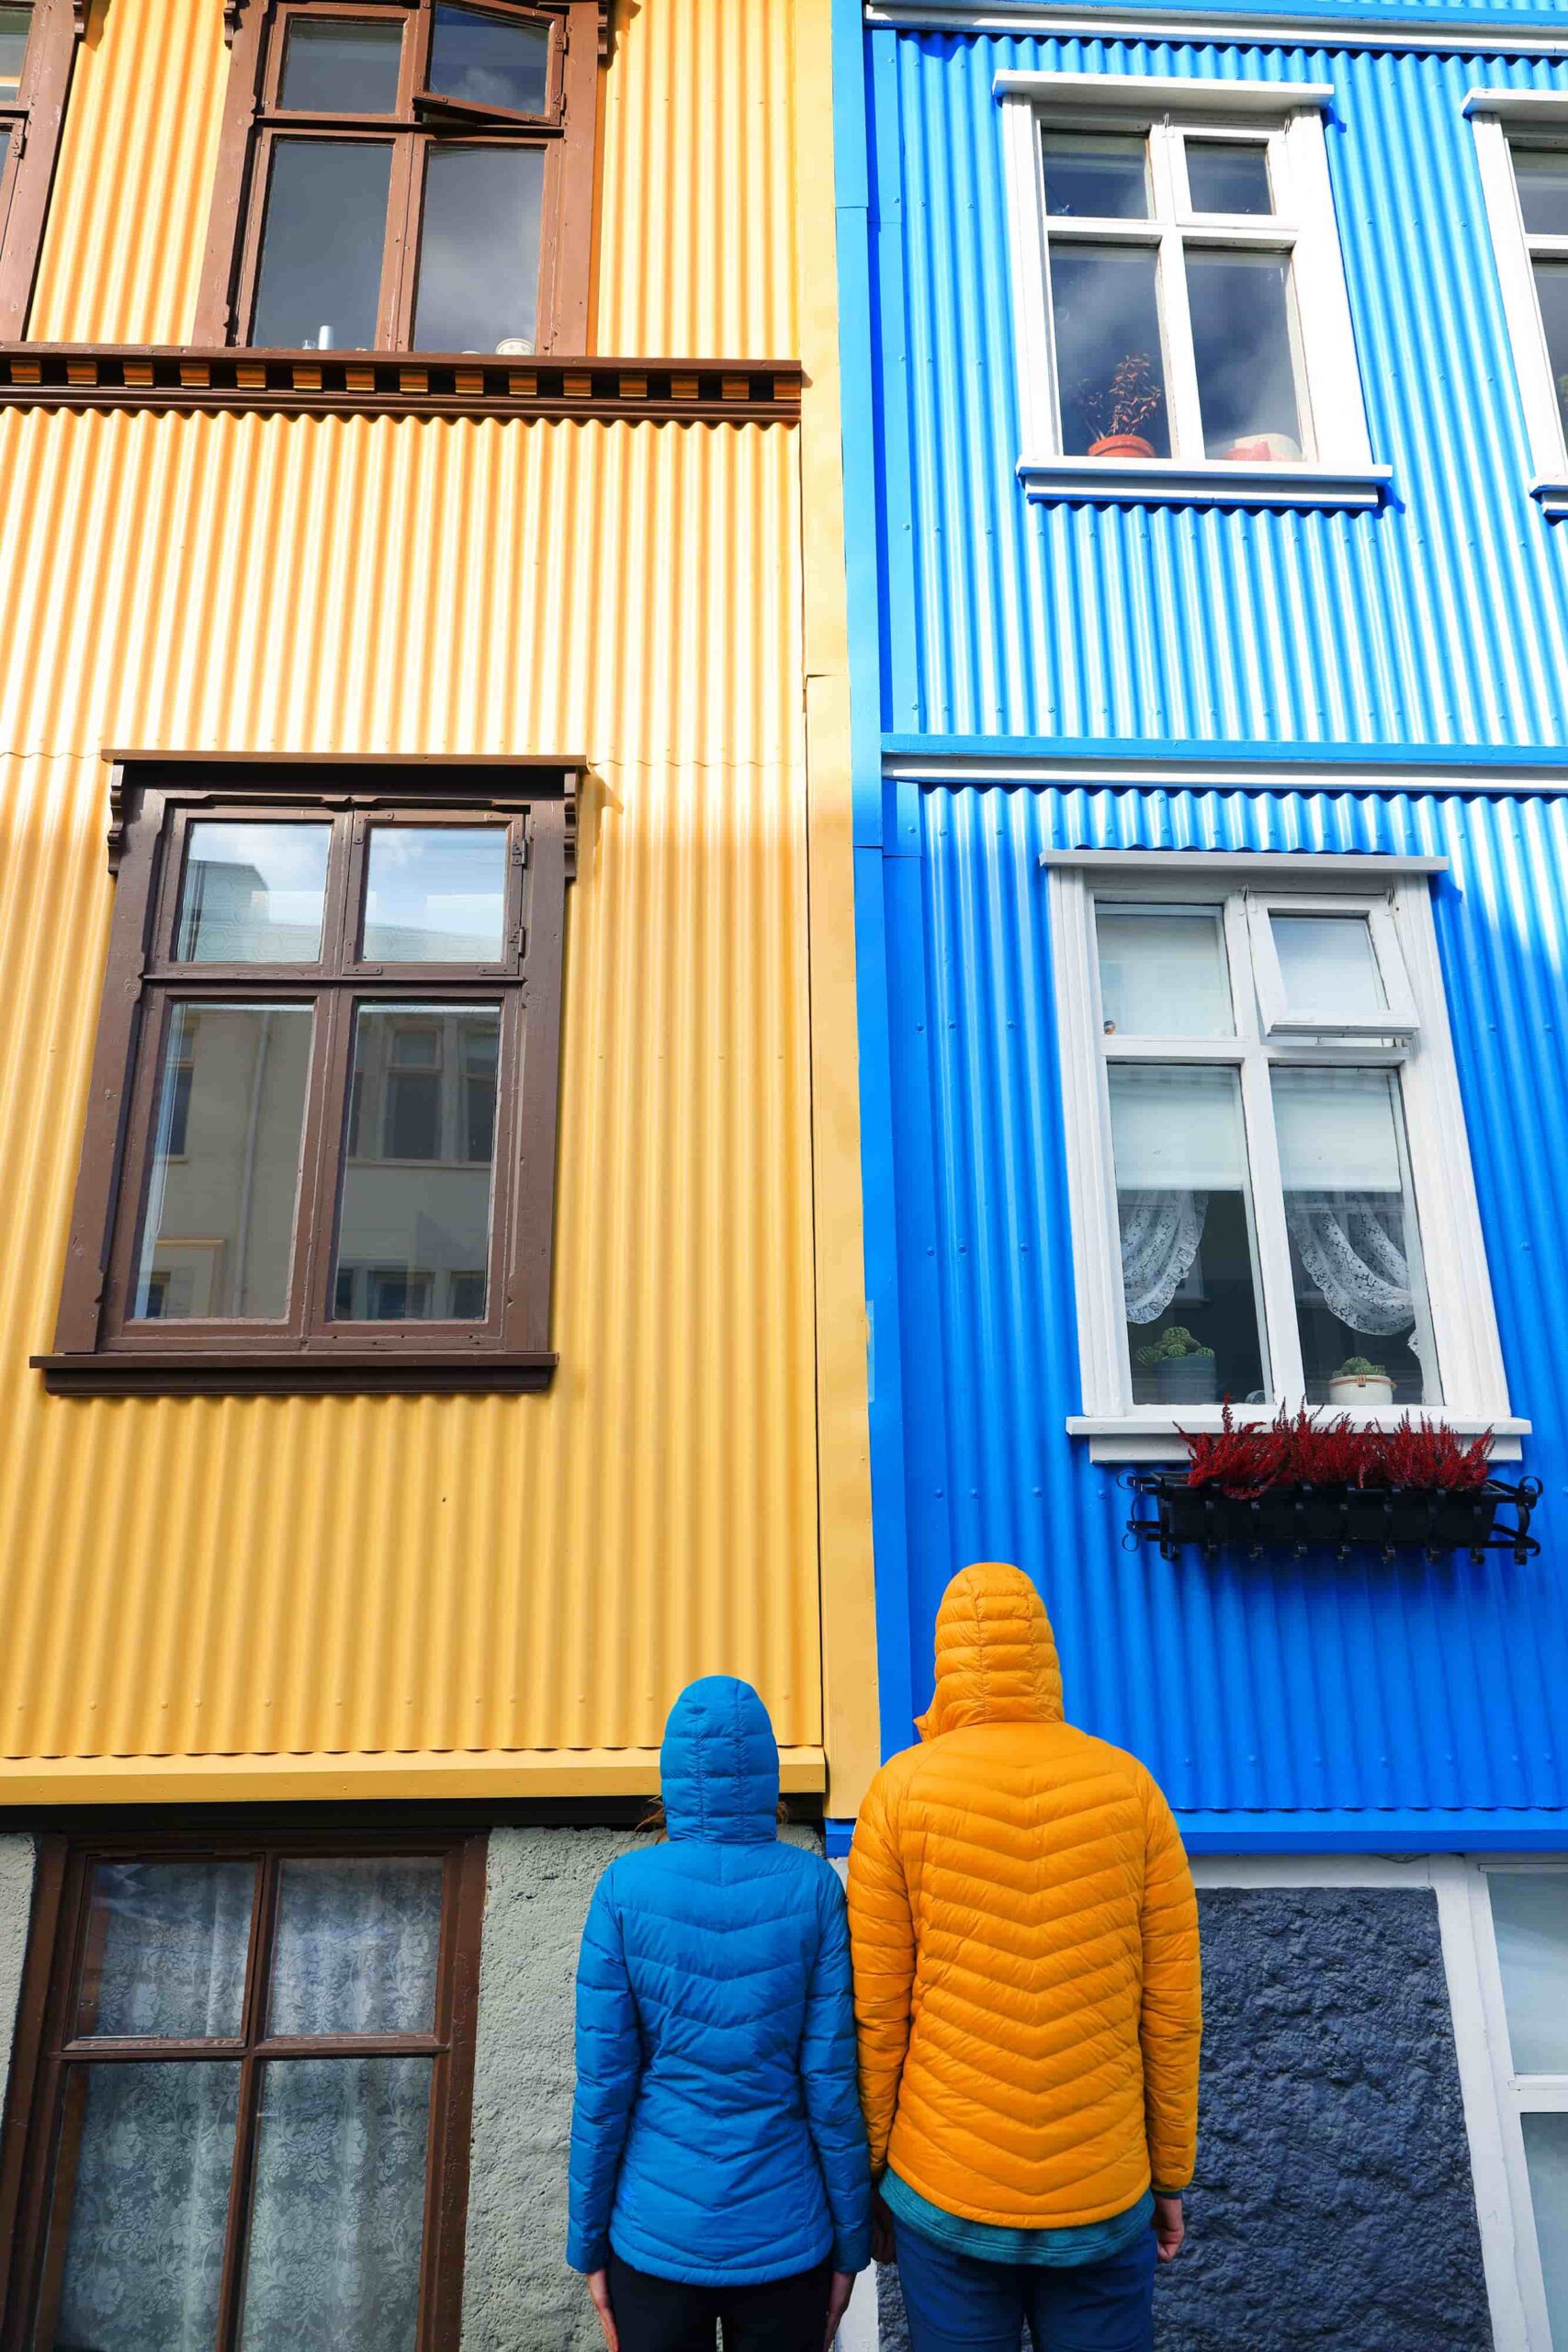 Colourful houses in downtown Reykjavik.